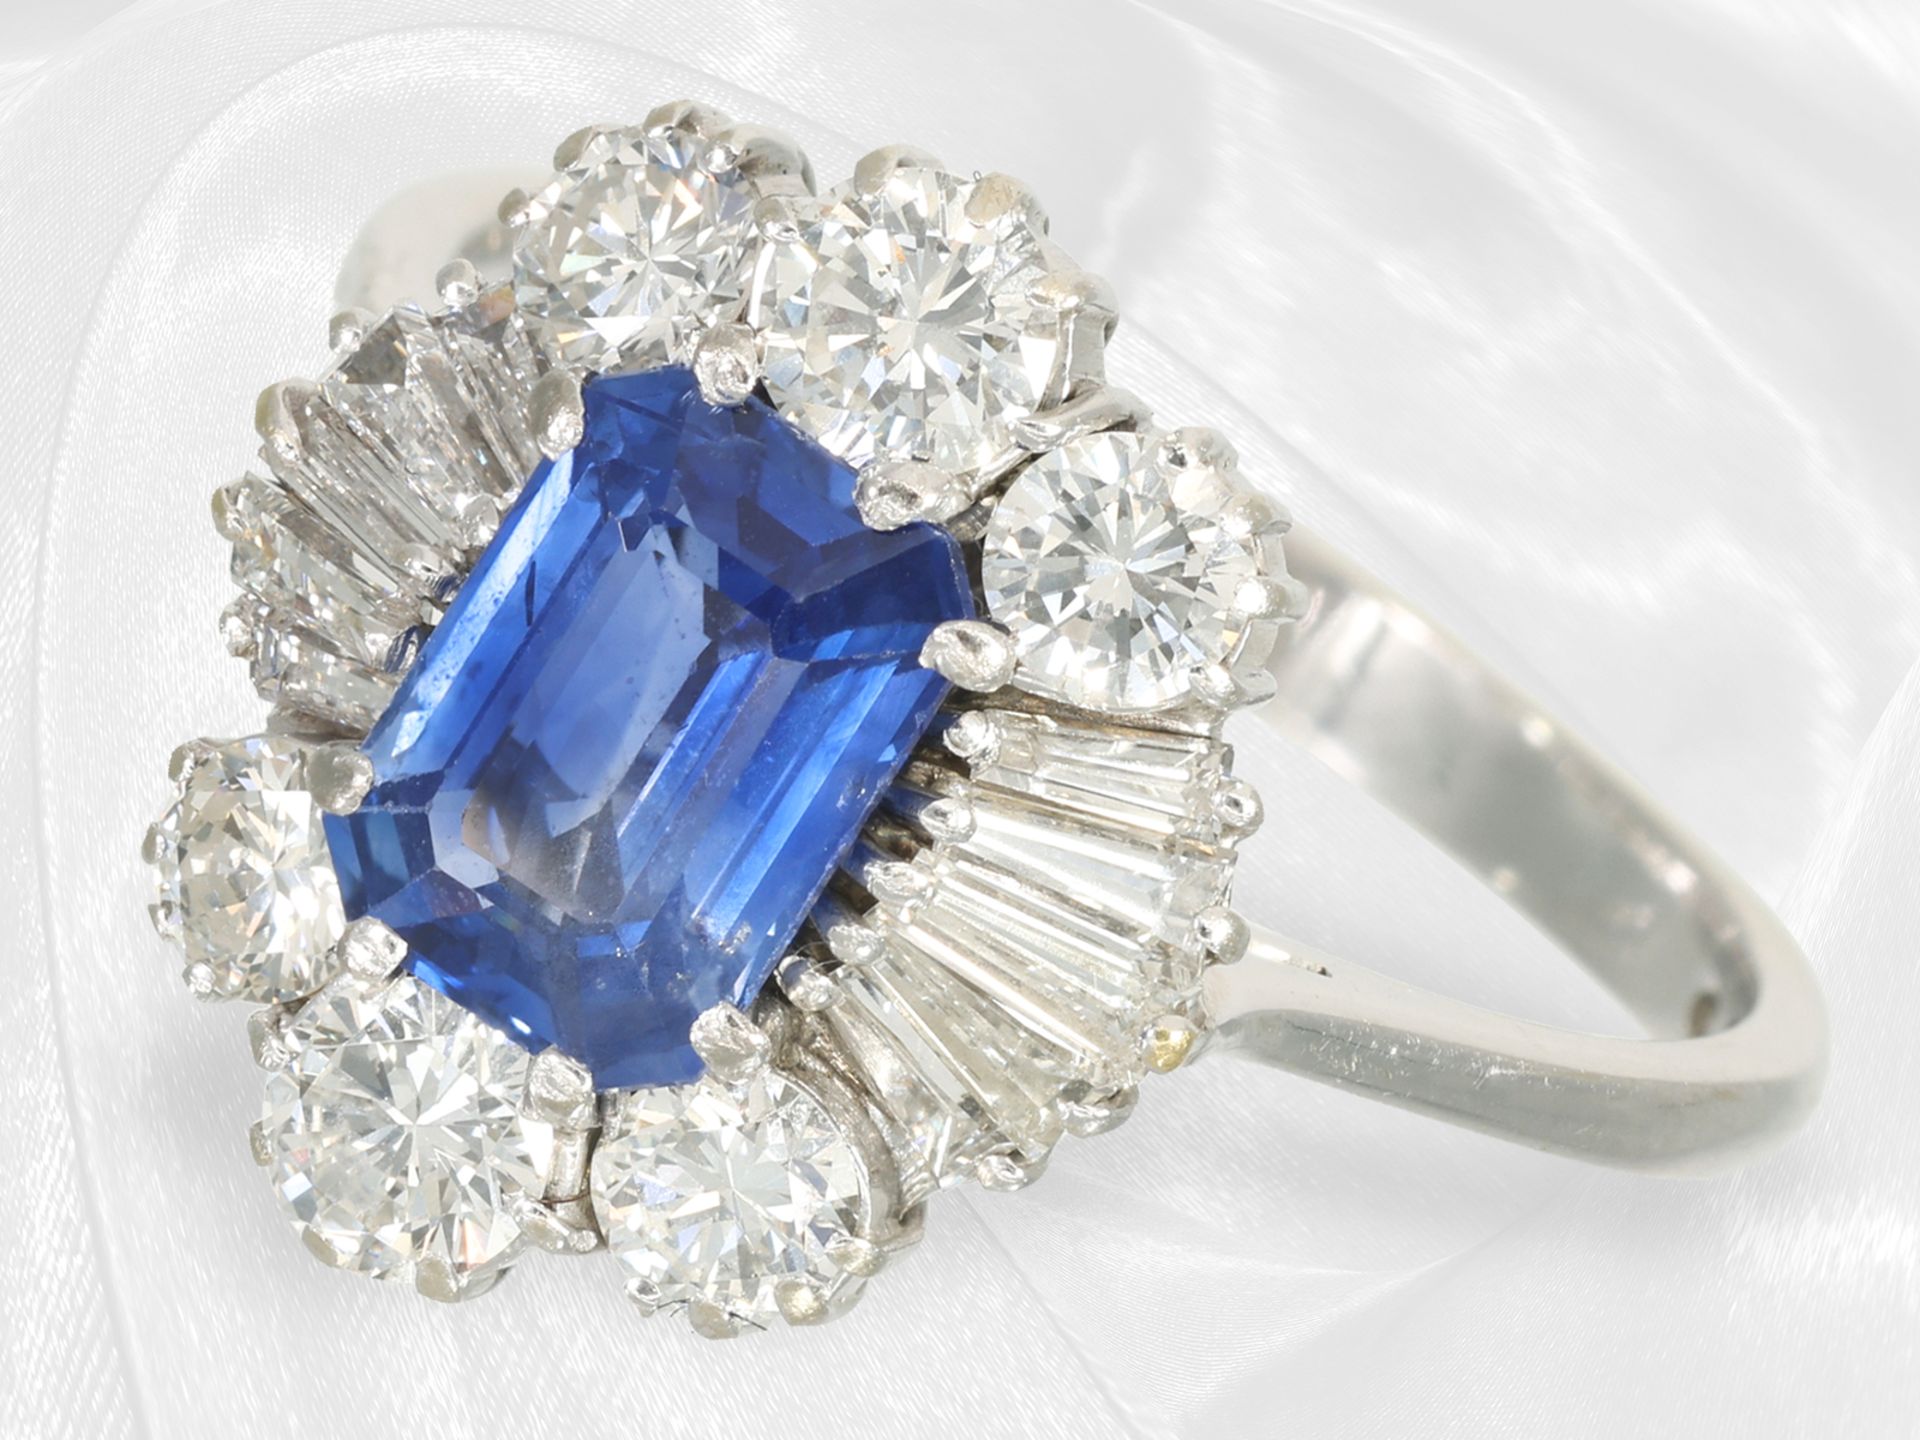 Very beautiful goldsmith's ring with fine gemstone setting, 18K white gold - Image 8 of 10